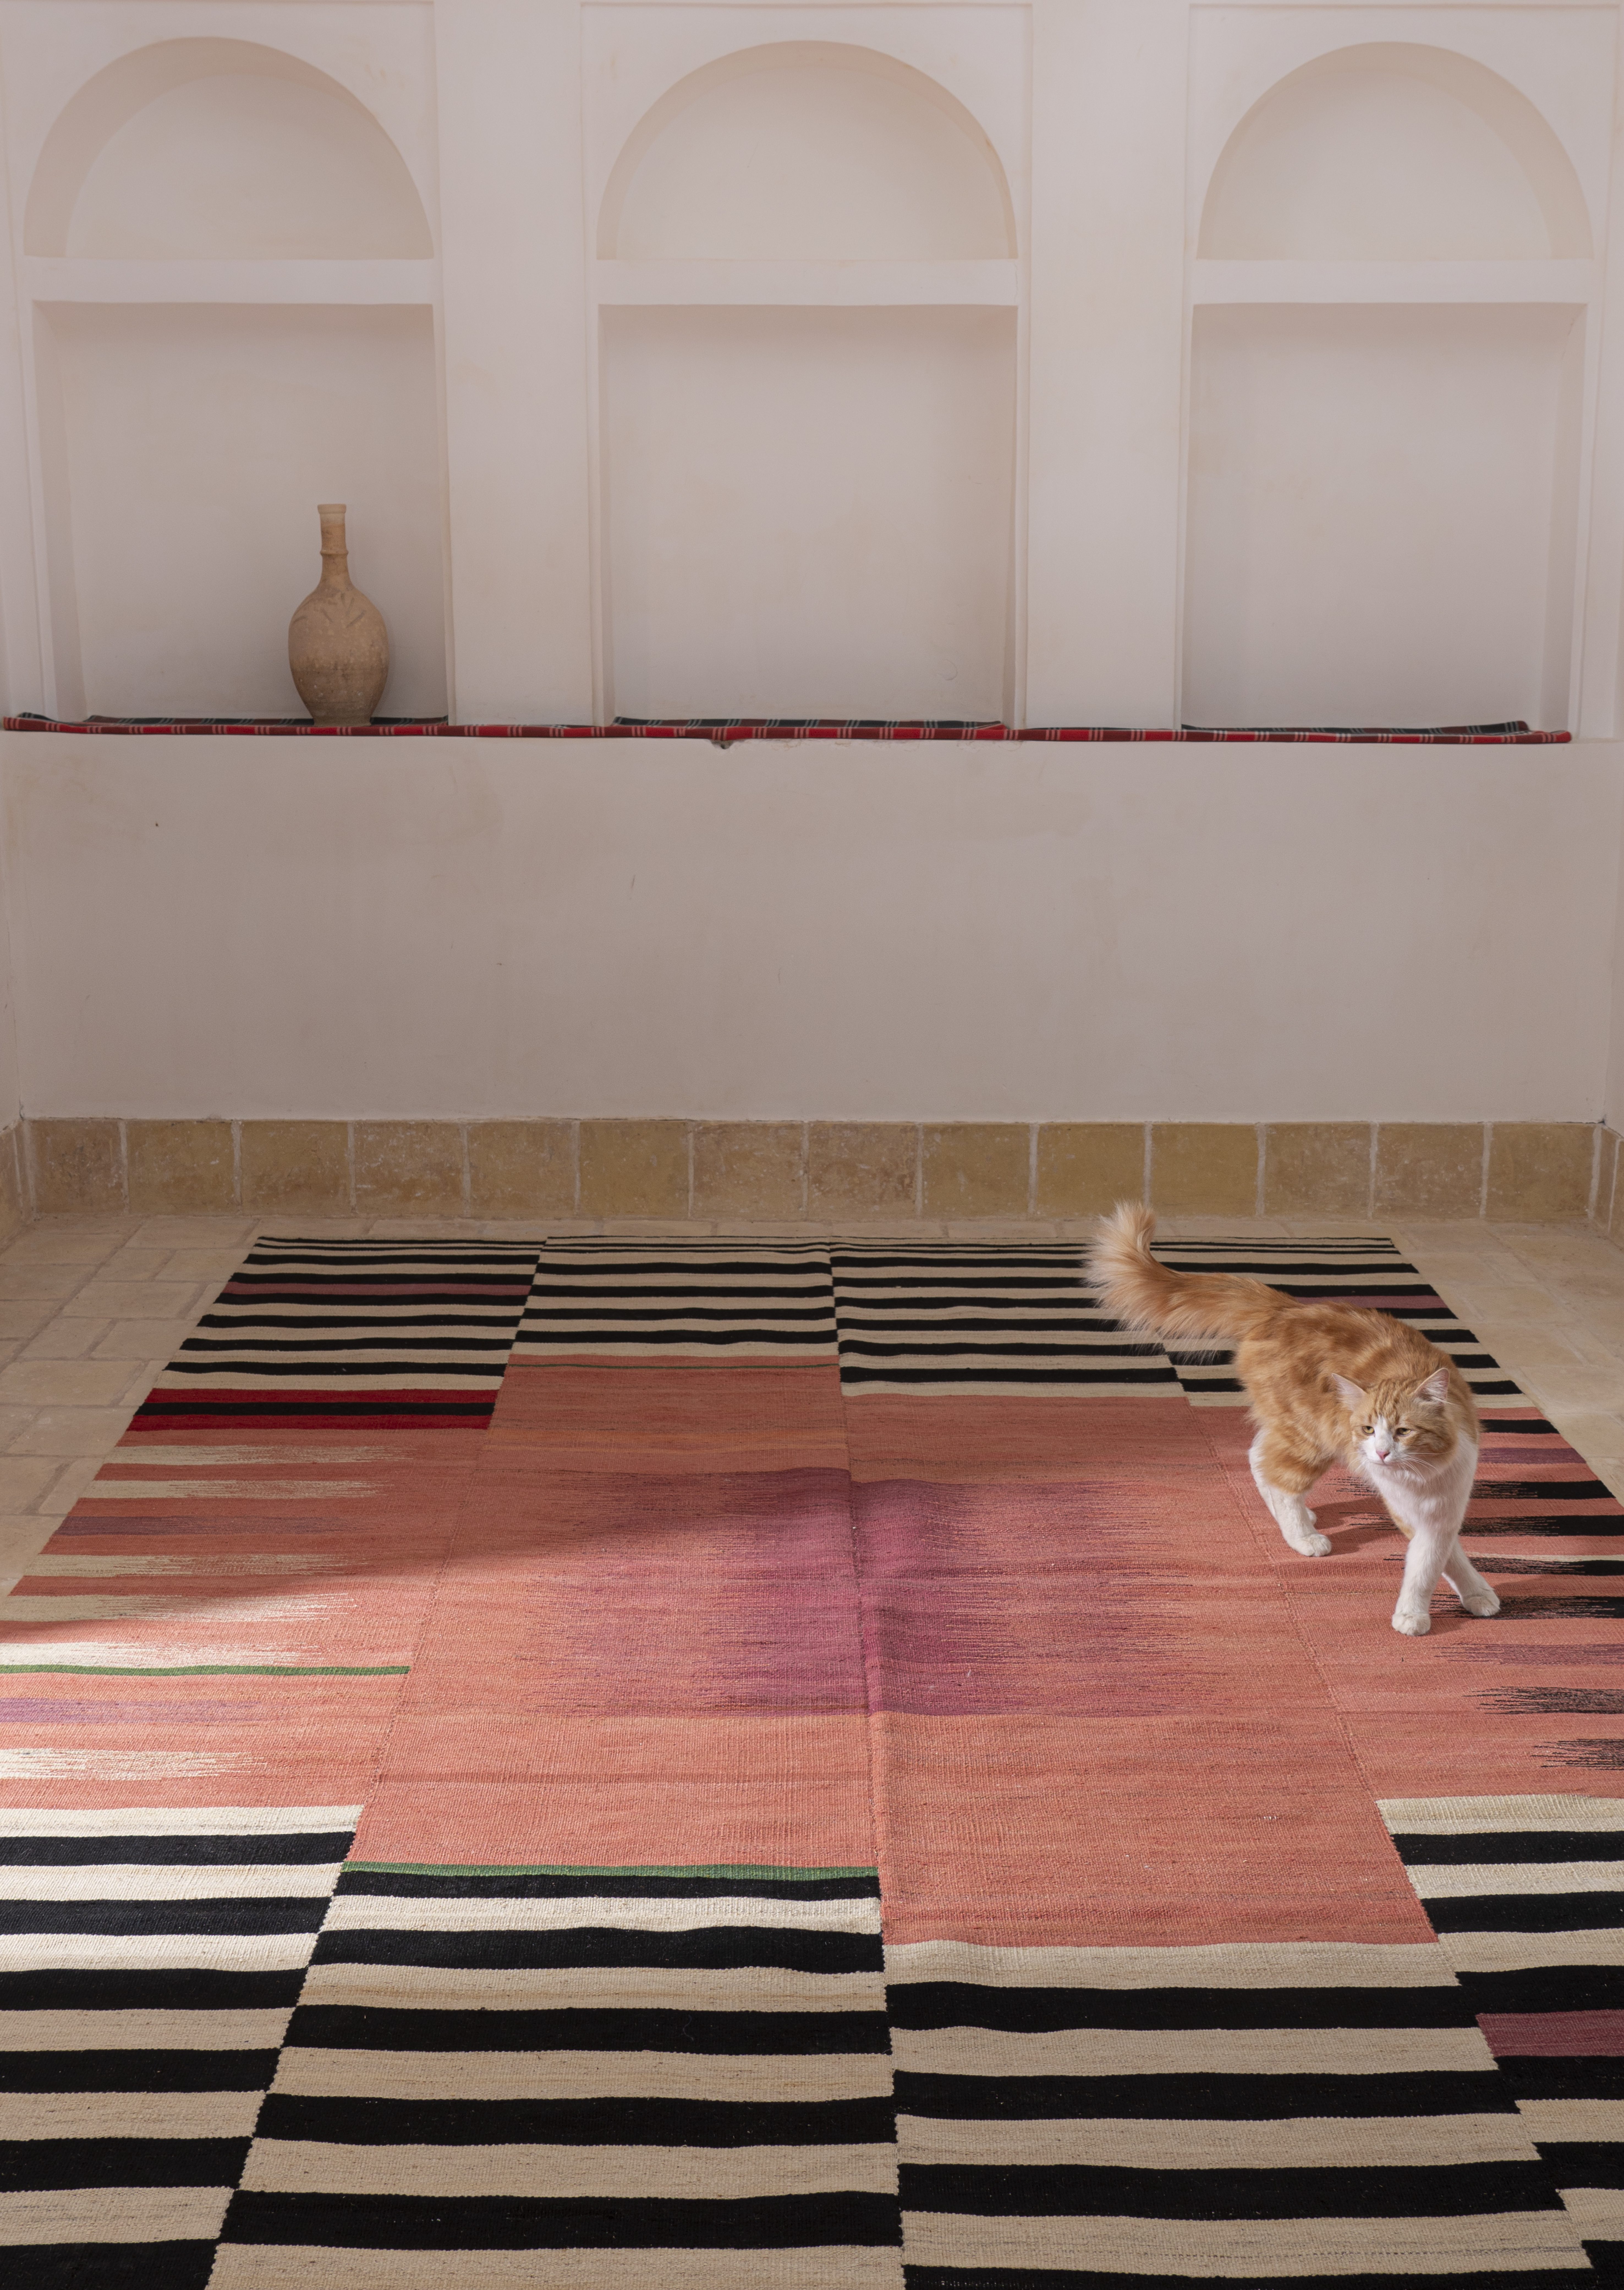 Room with white wall and tiled floor features striking area rug of beige, black, re , orange and mauve. Cat walks on rug.